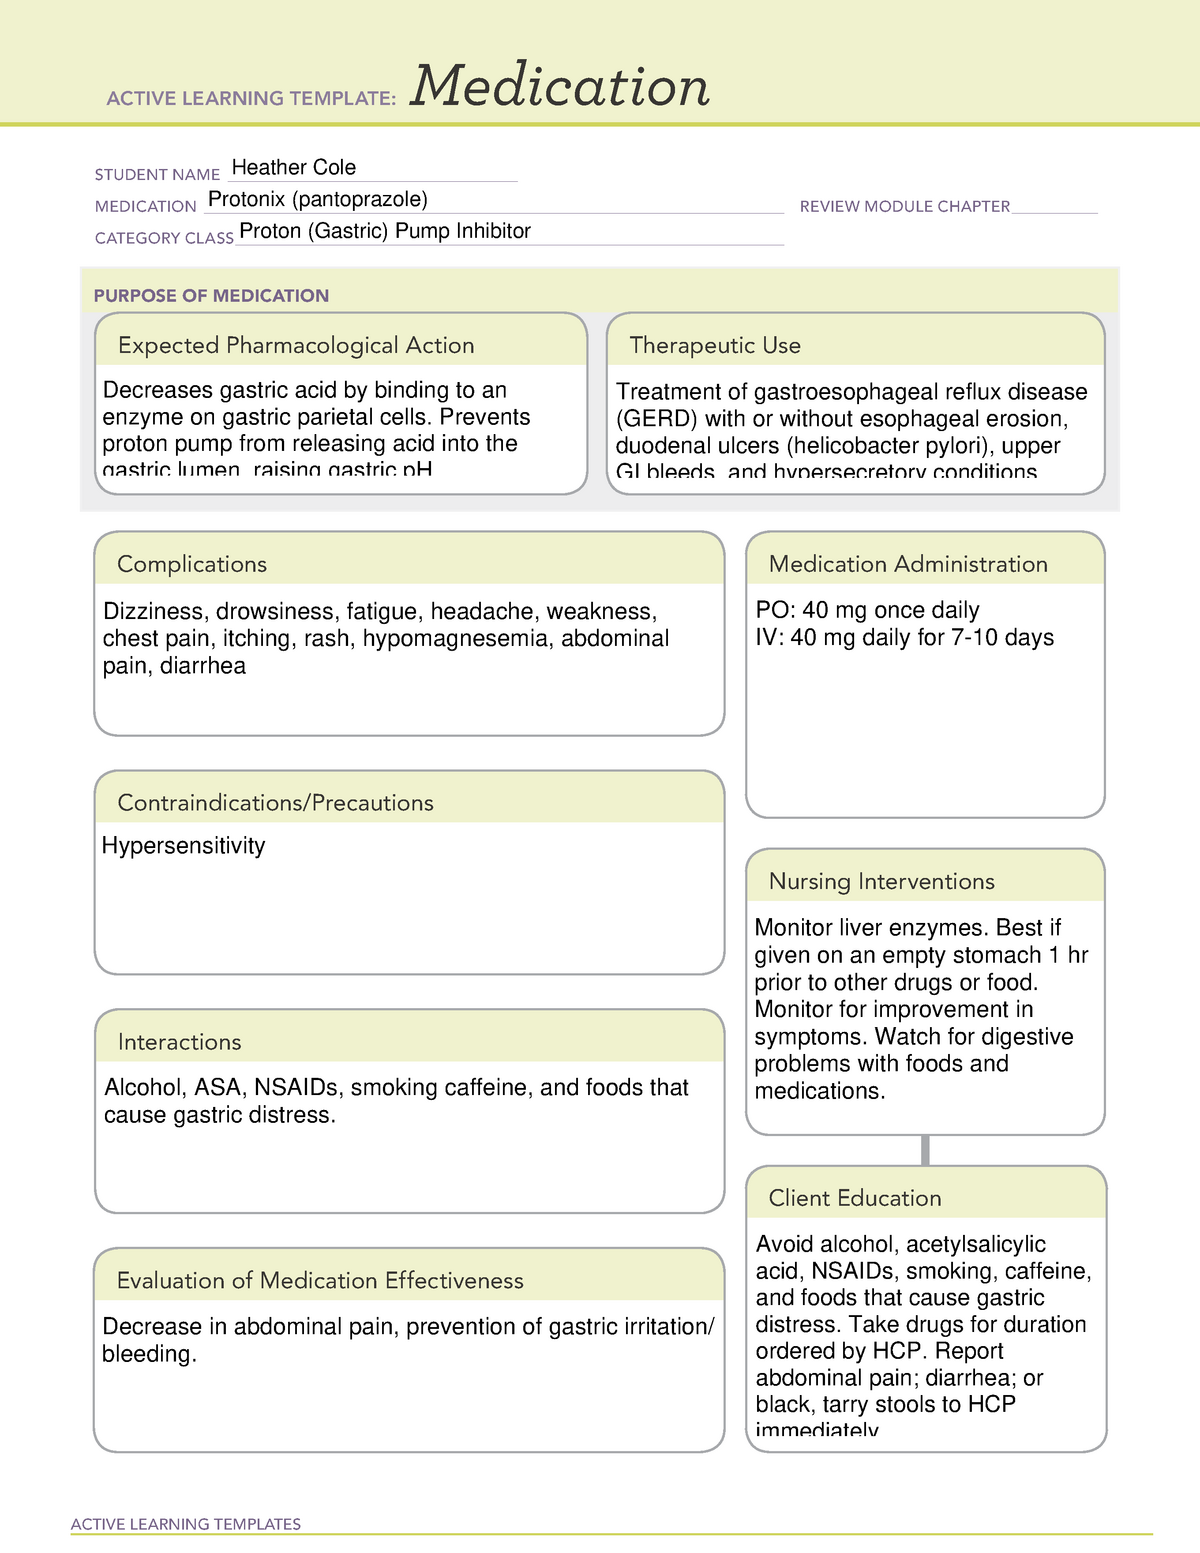 Protonix drug cards ACTIVE LEARNING TEMPLATES Medication STUDENT